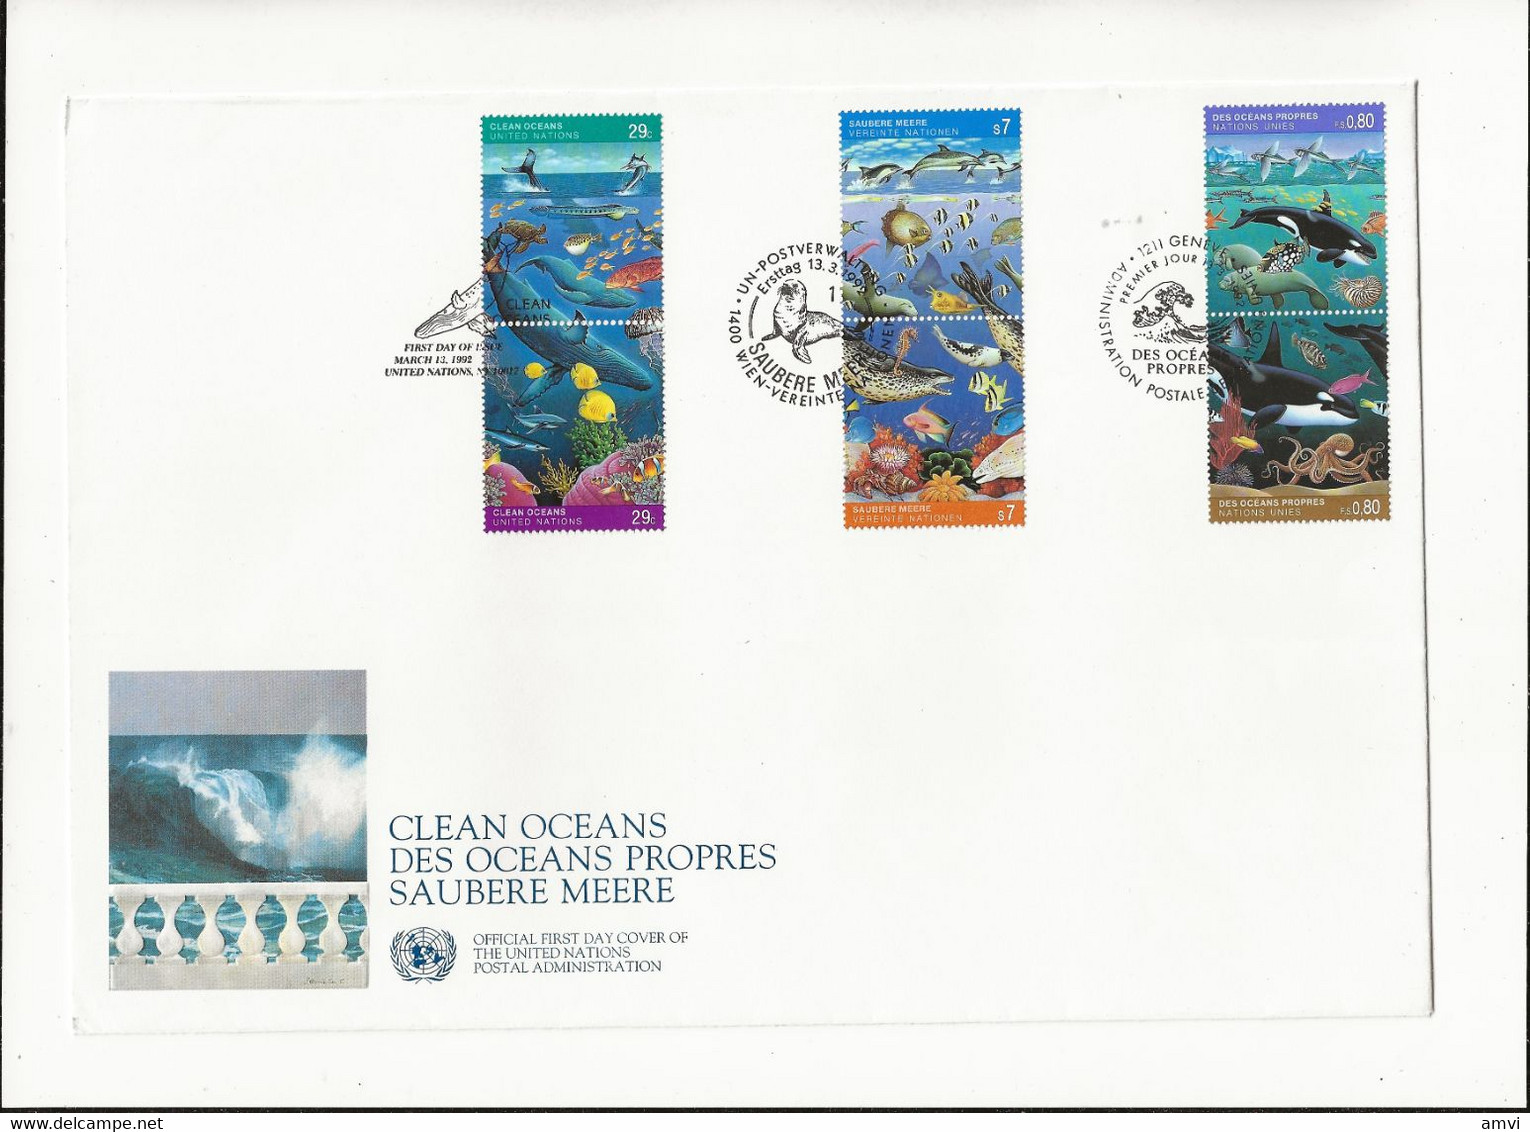 22-4 - 878 WHALES DOLPHIN FISH Multi Stamps FDC UN Vienna United Nations Environment Clean Oceans - Whales